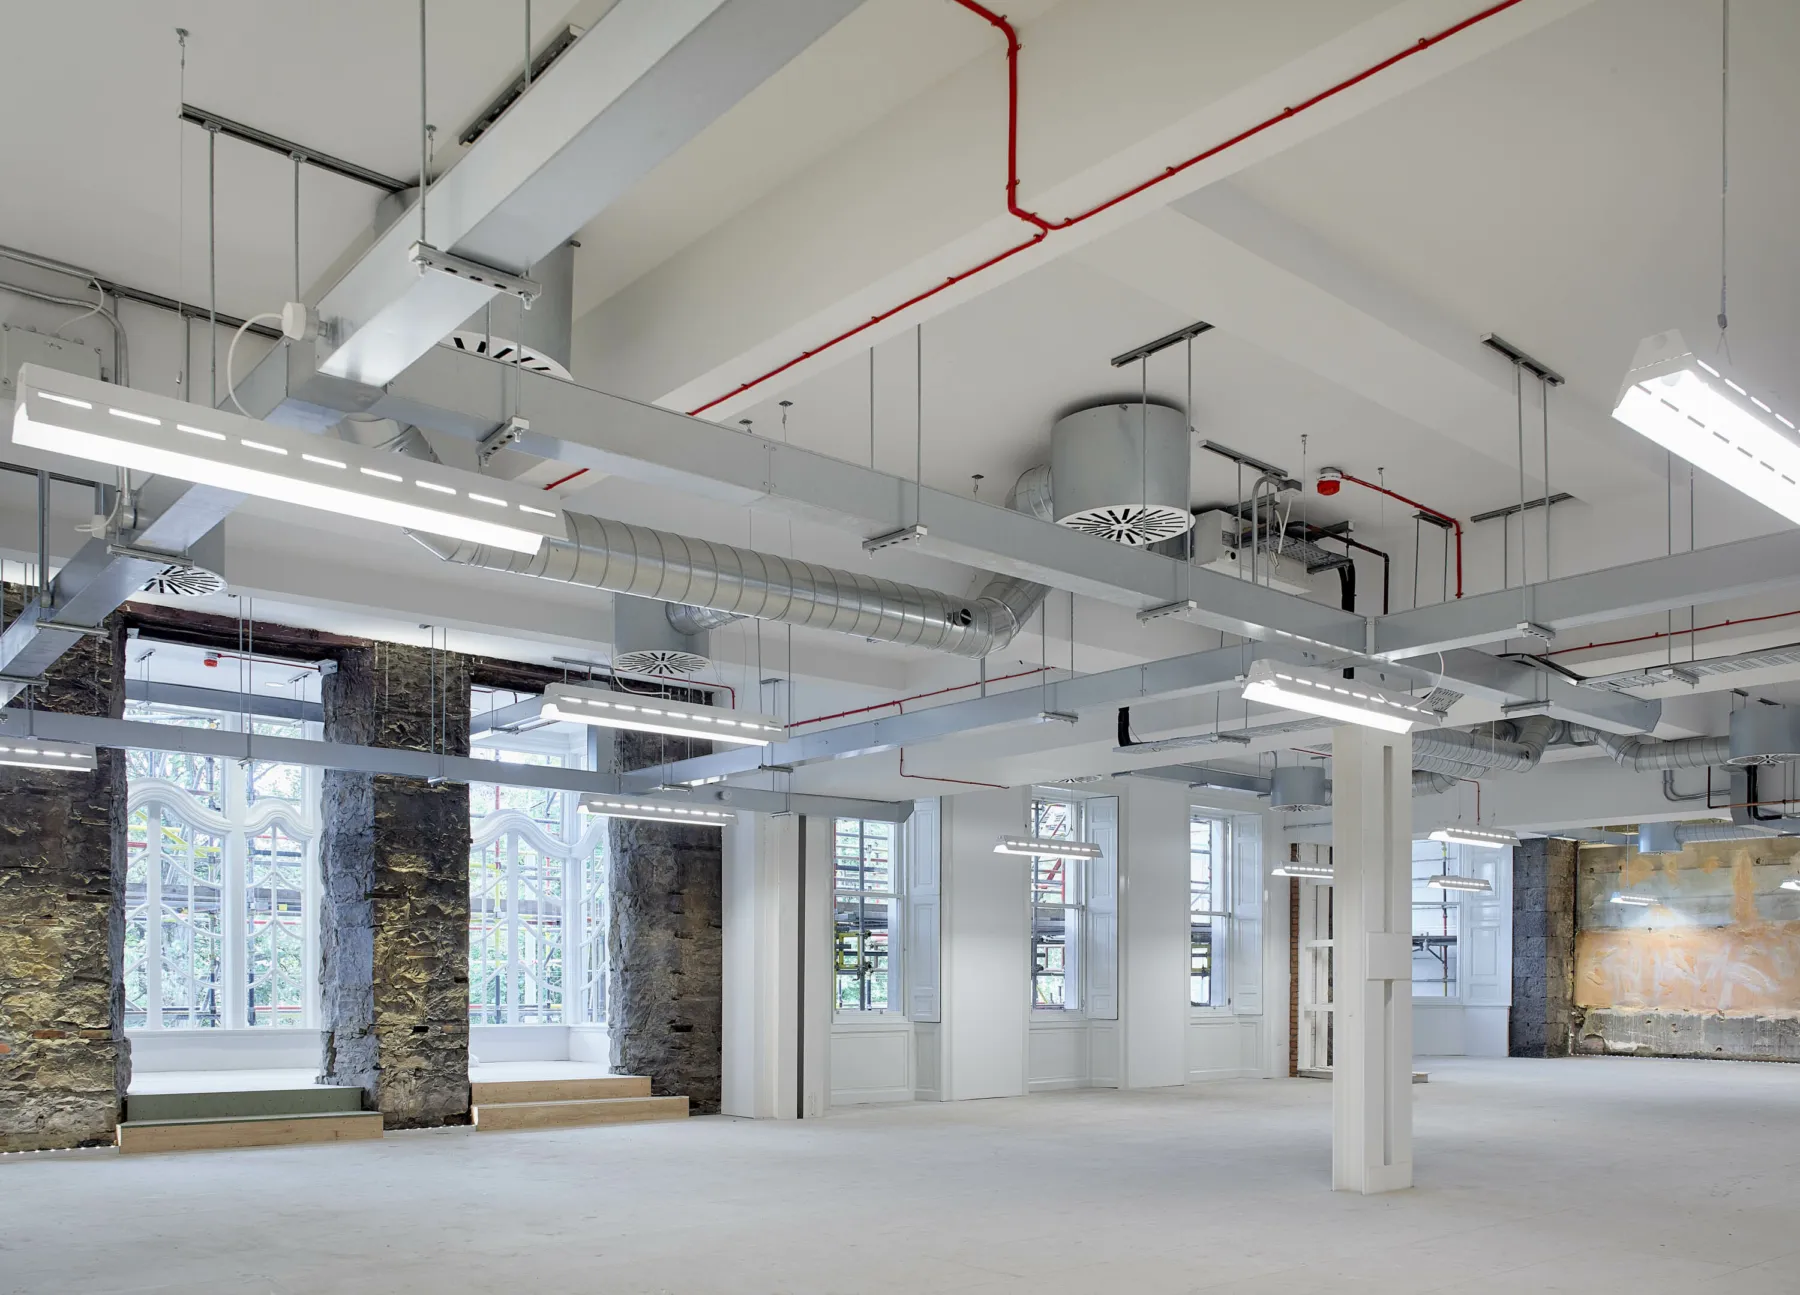 Inside a defurbished office in a listed building. Exposed stonework and services are part of the aesthetic, with ducting and wiring visible along with distressed plasterwork.